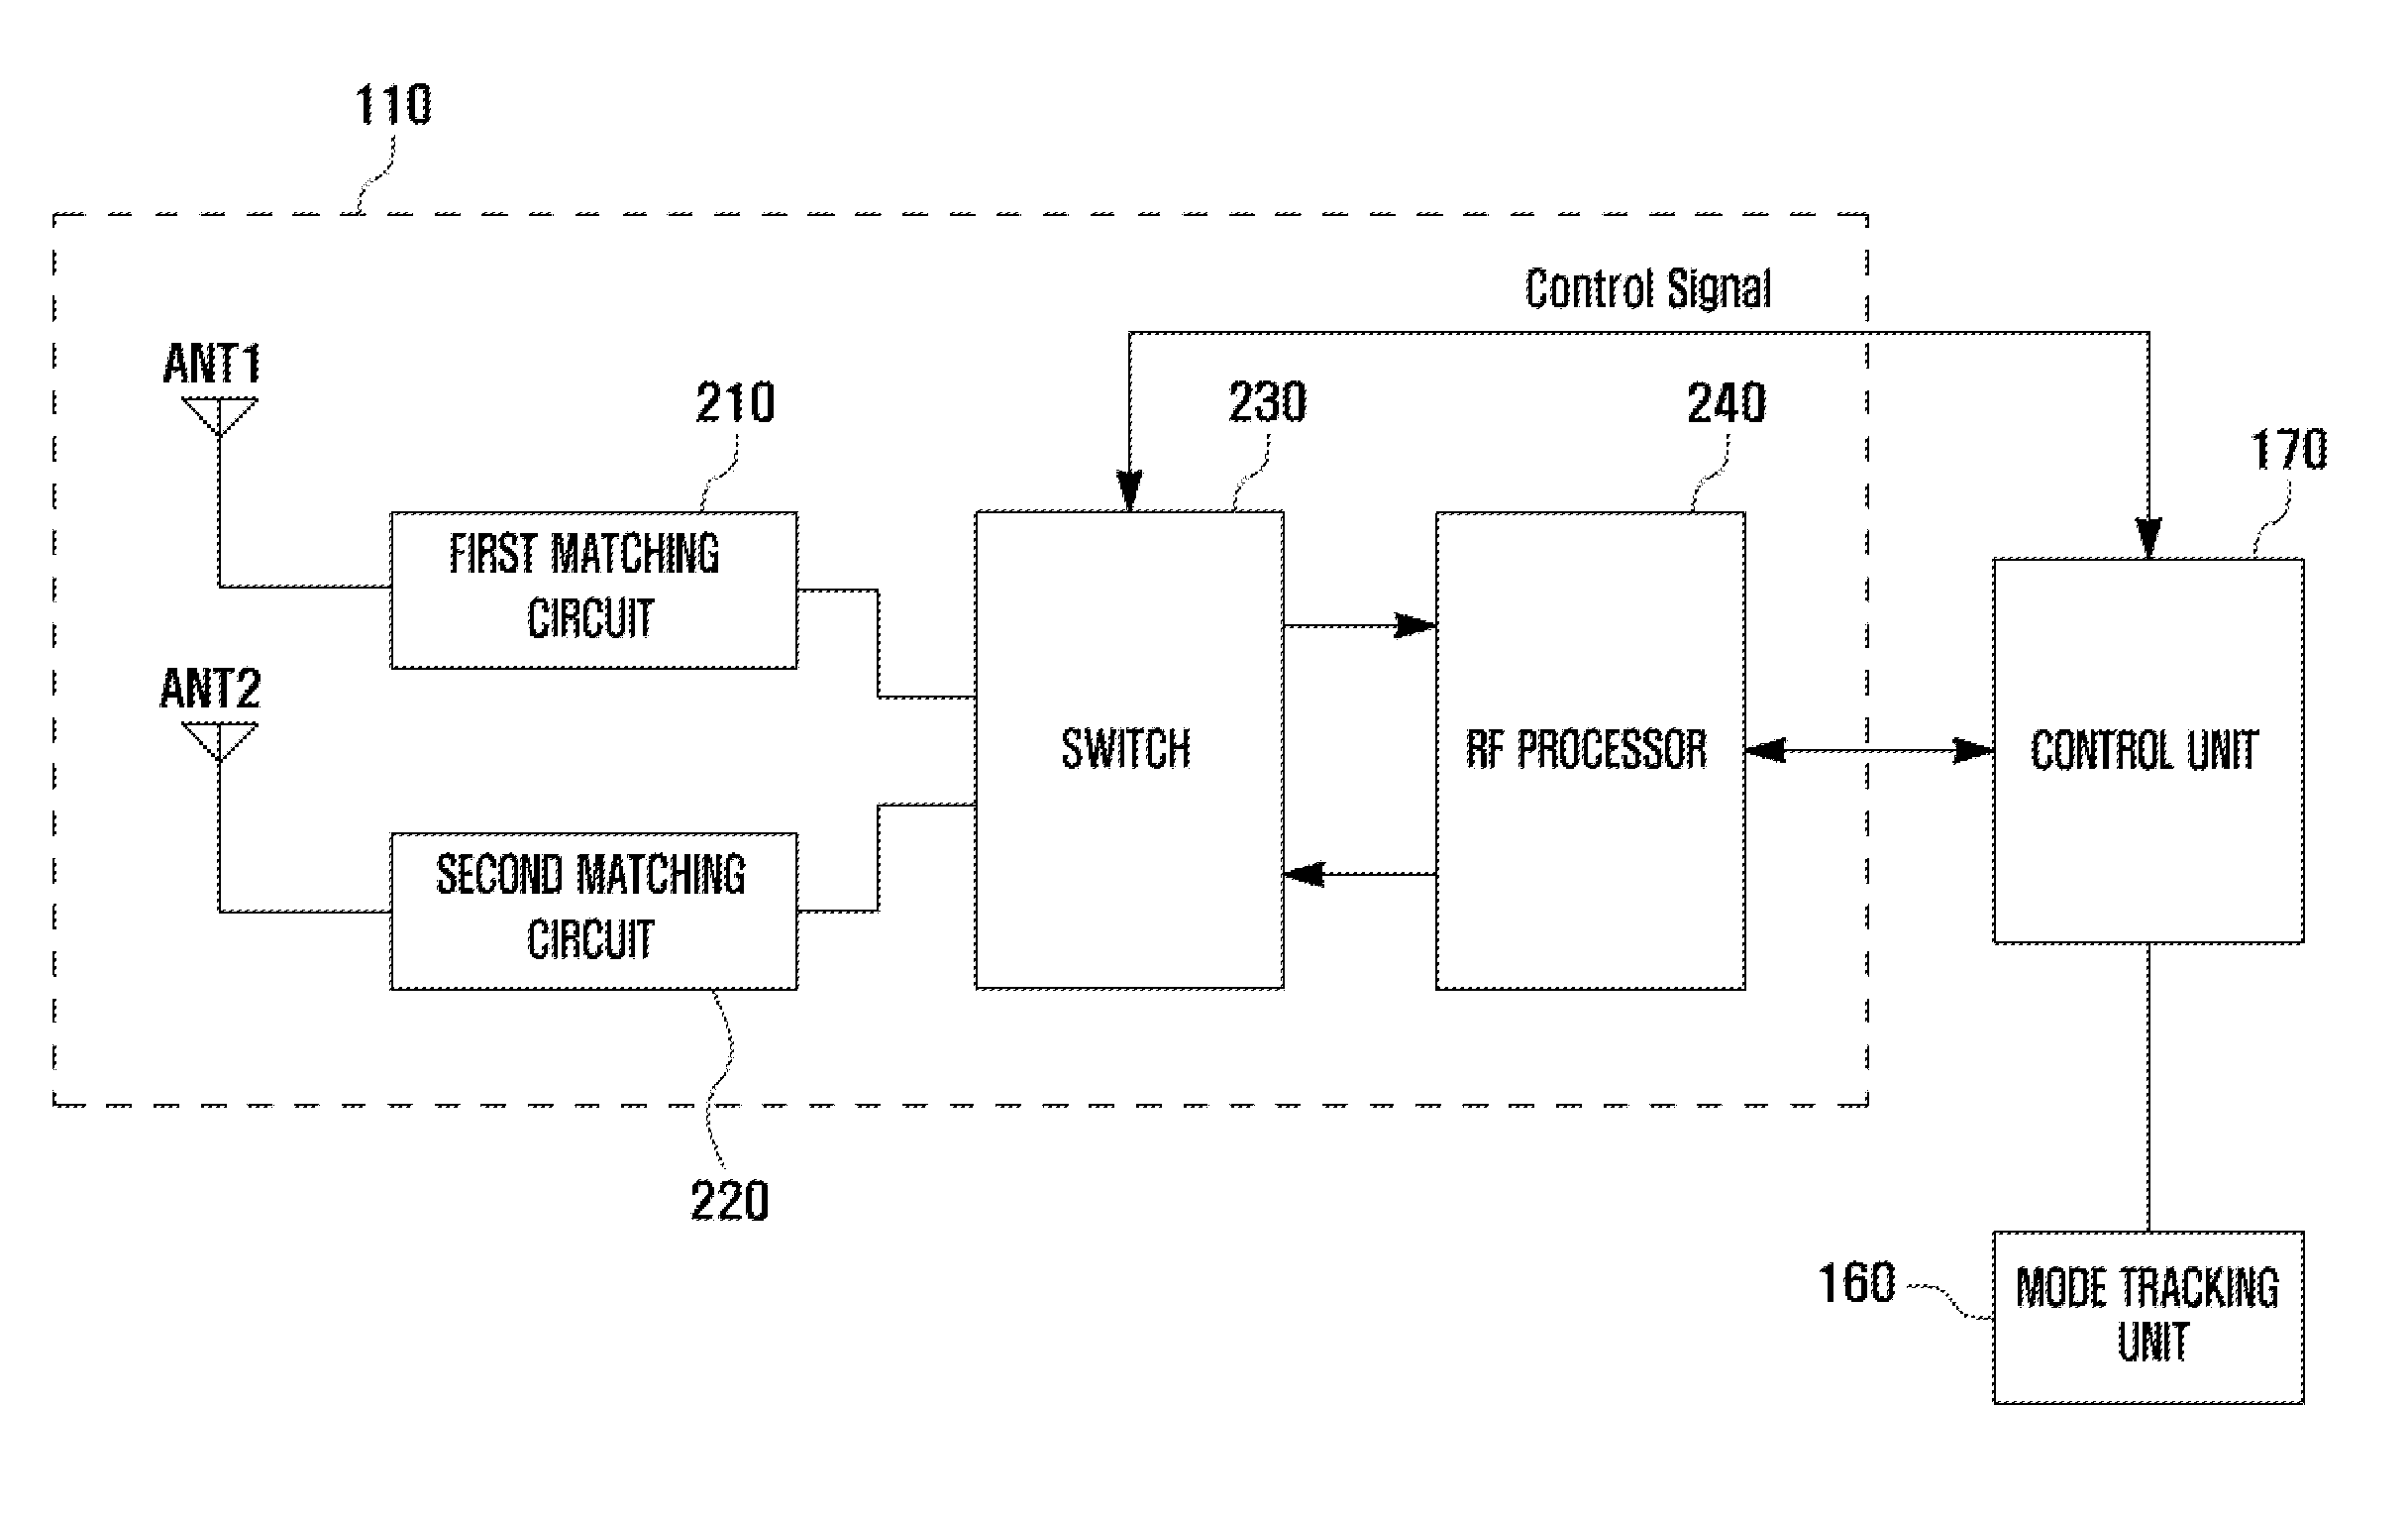 Voice call processing method and apparatus for mobile terminal